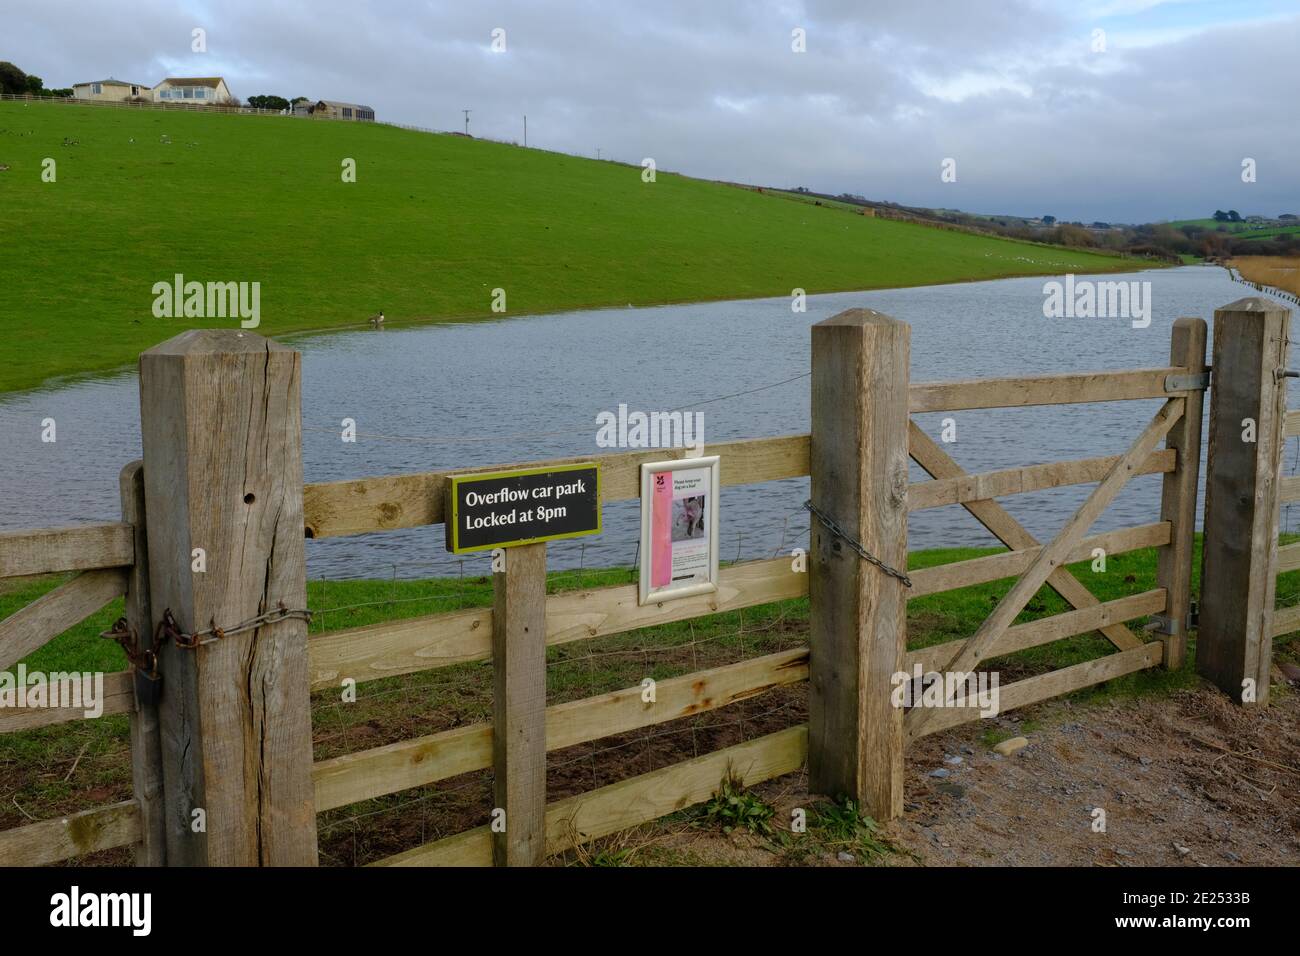 View of flooded overflow car park with aptly descriptive sign on the fence. South Milton Ley Reserve, Thurlestone, South Devon, UK Stock Photo